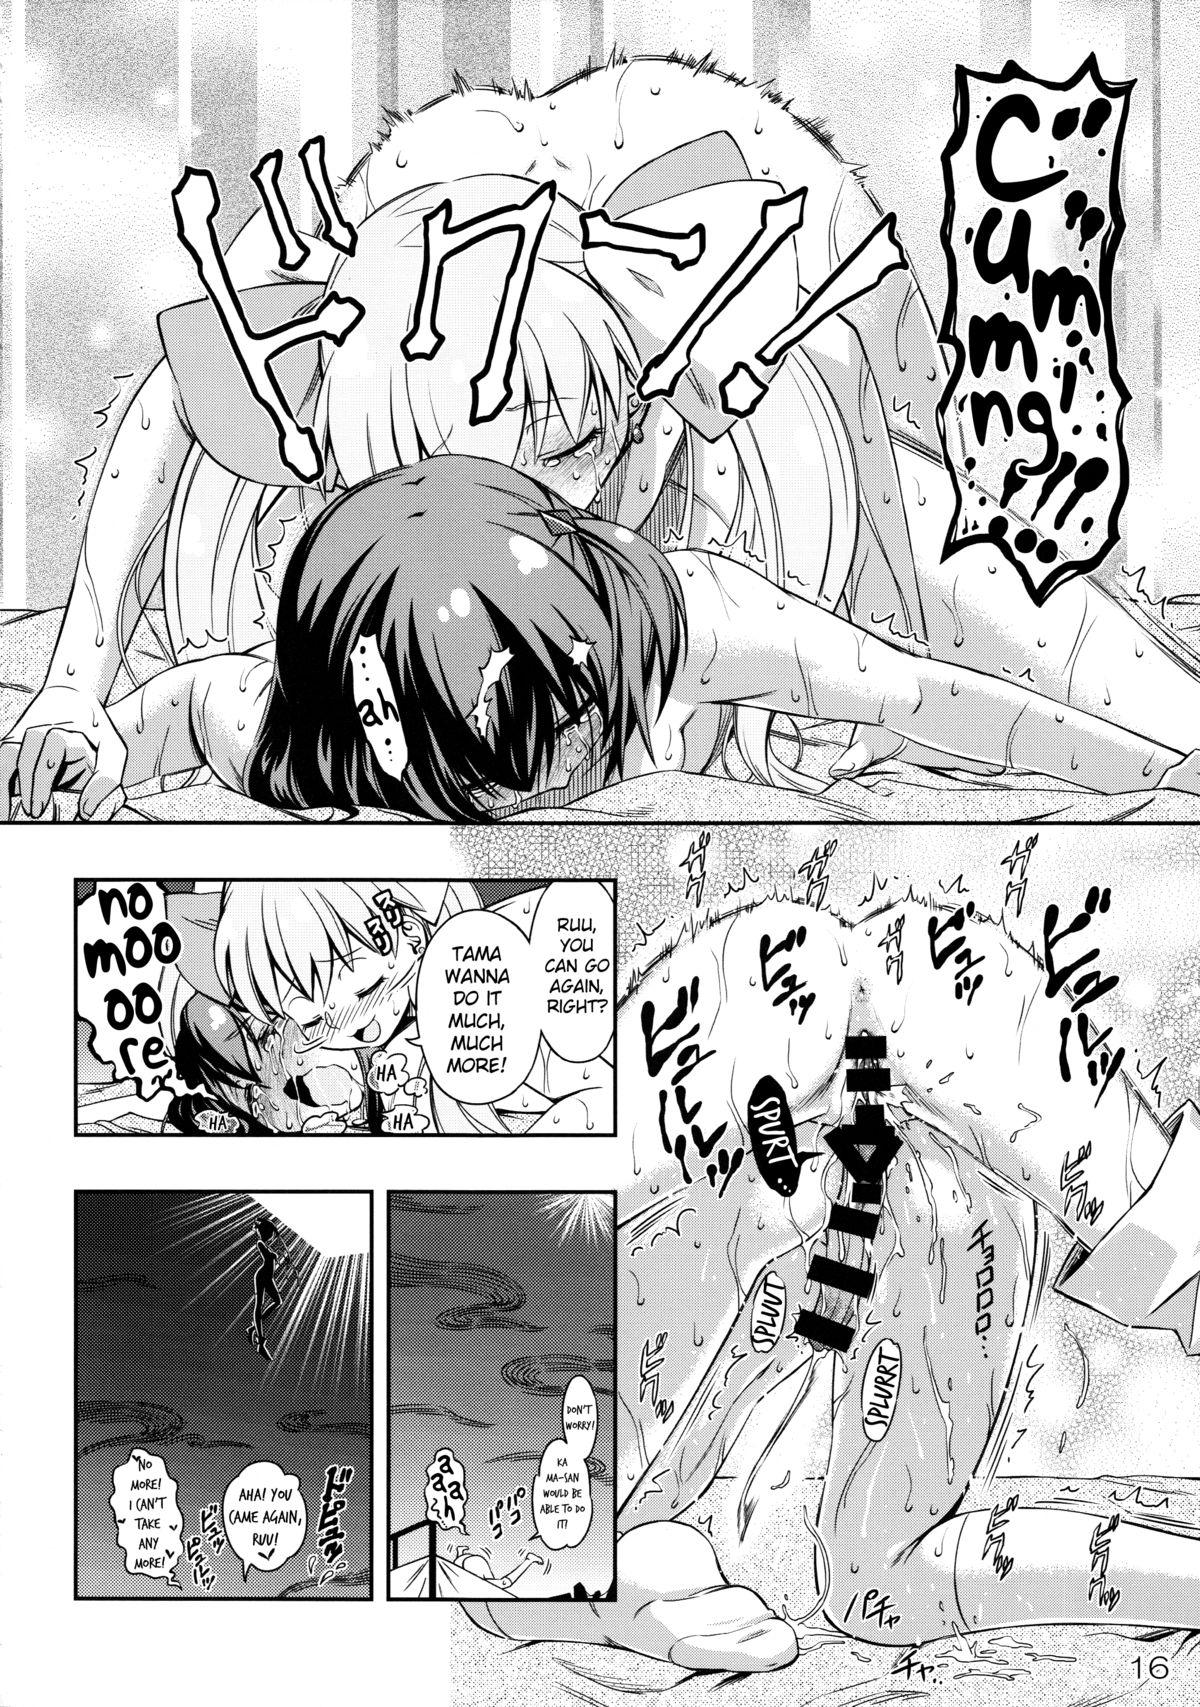 Colombia Immoral Batou! - Selector infected wixoss Moaning - Page 16